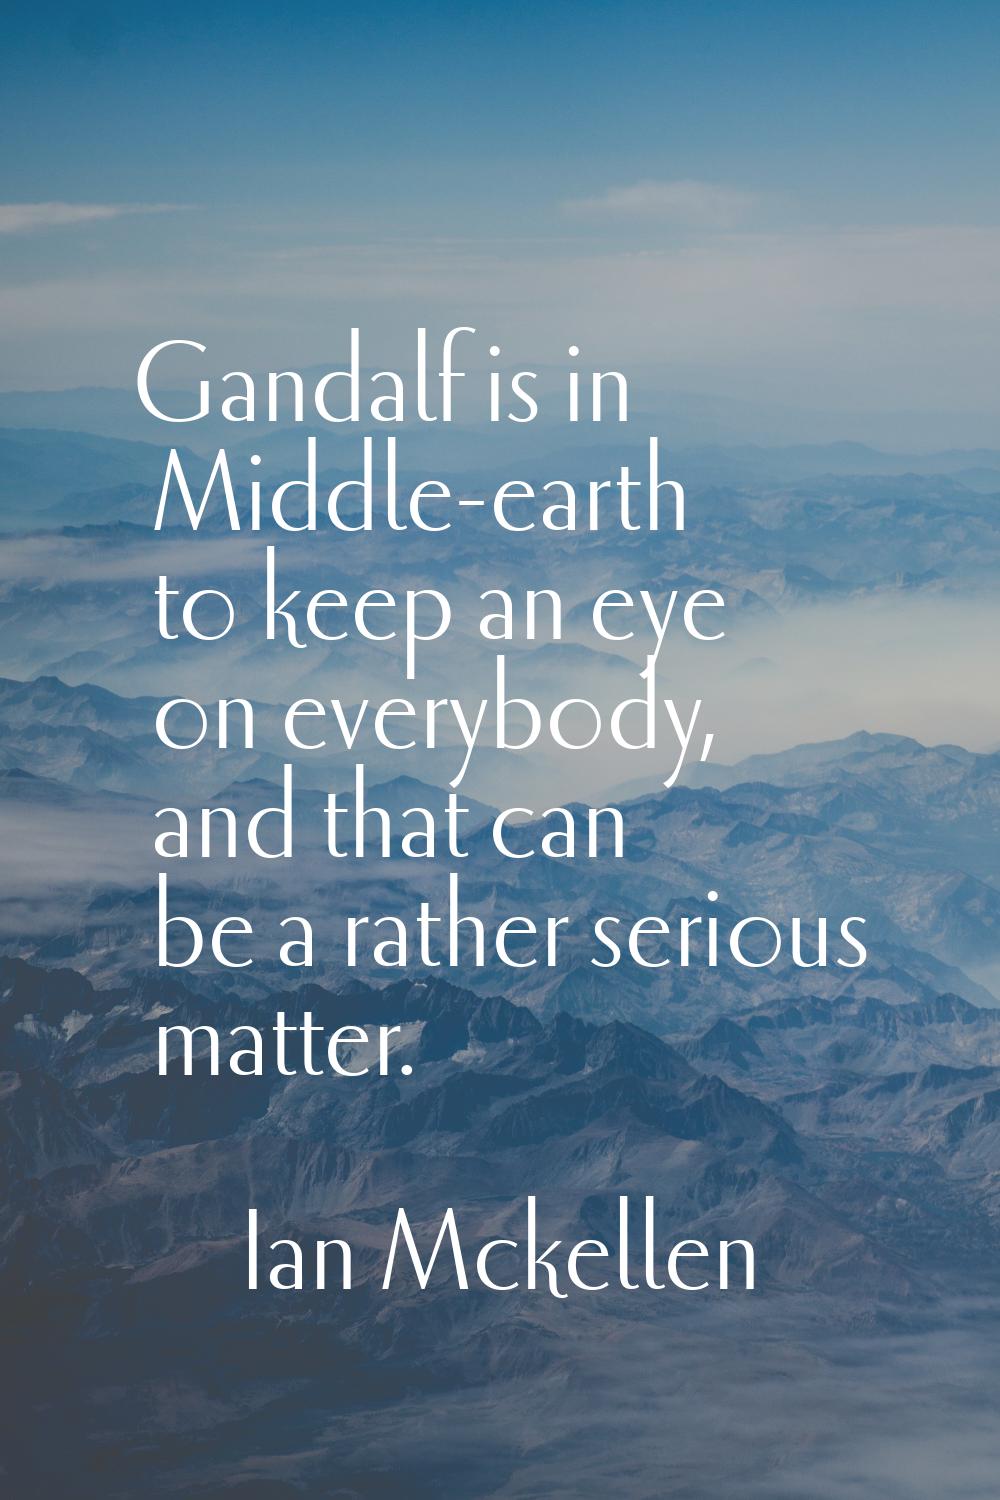 Gandalf is in Middle-earth to keep an eye on everybody, and that can be a rather serious matter.